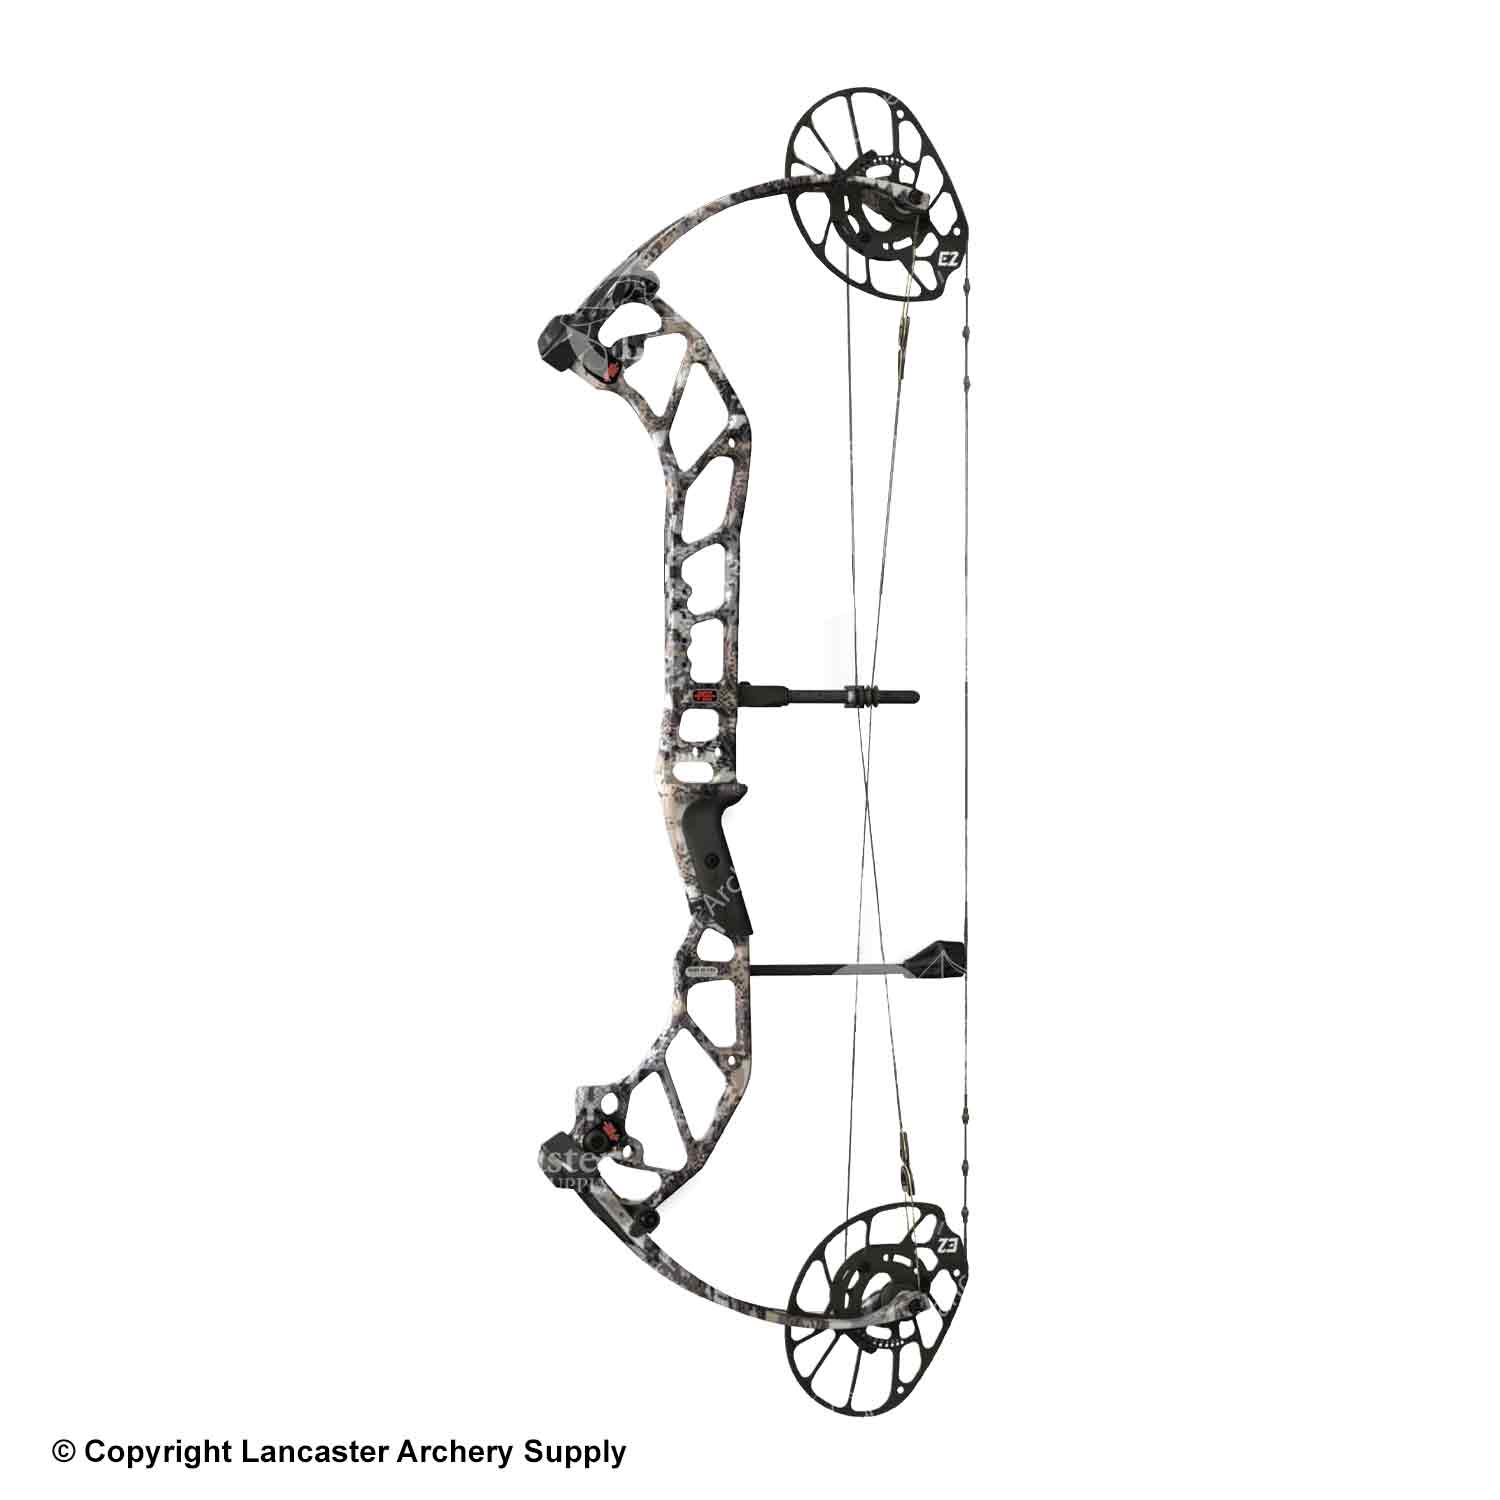 PSE EVO XF 30 with EC Cam Compound Hunting Bow